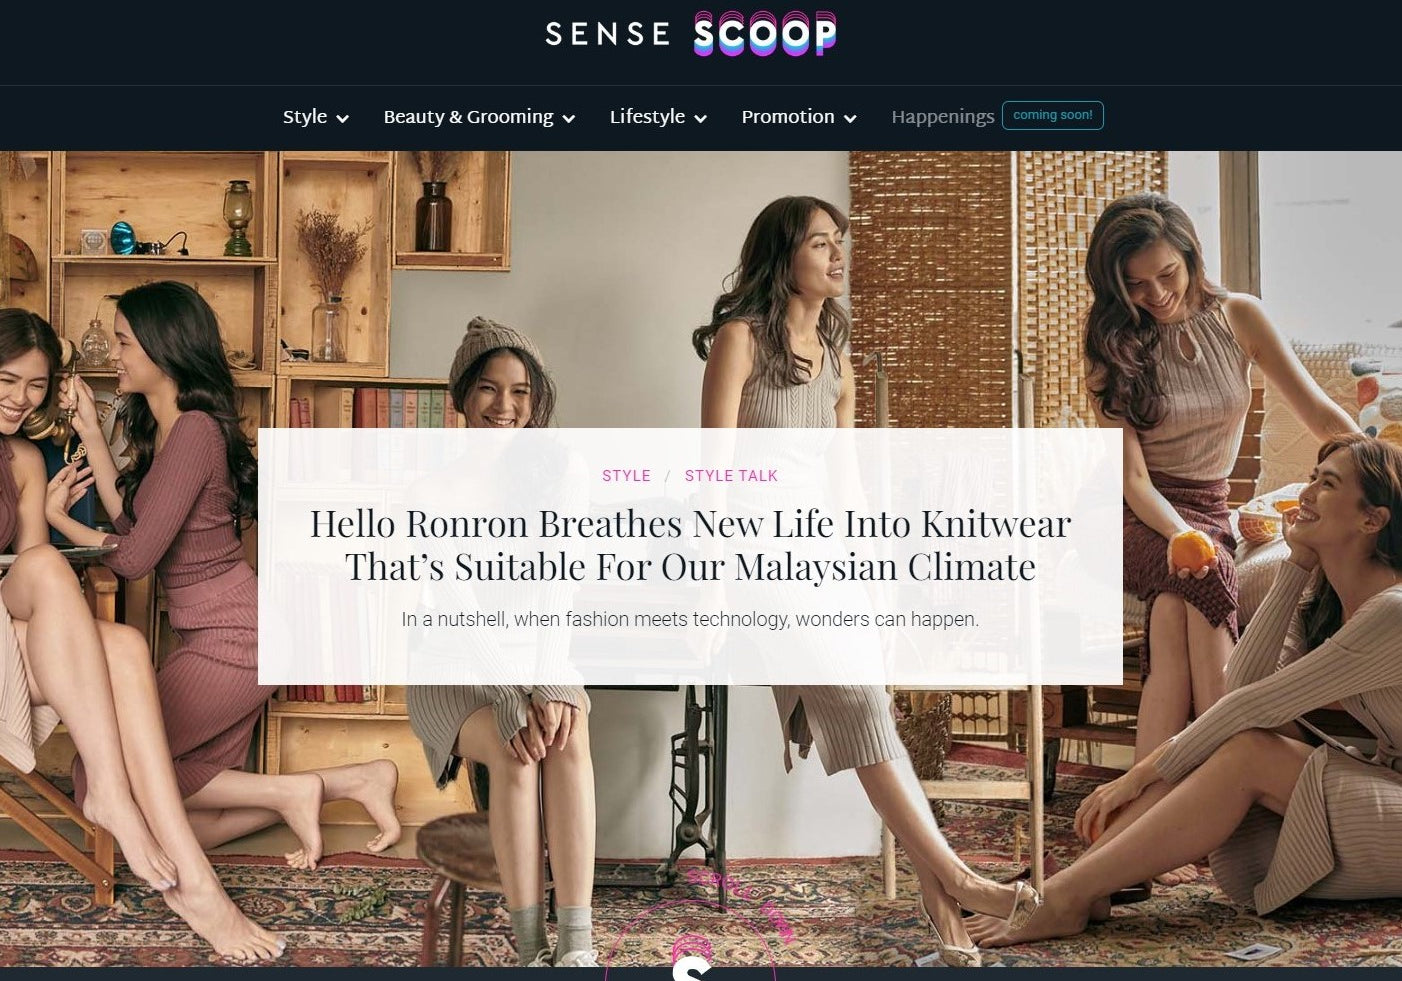 Sensescoop ' hello ronron breathes new life into knitwear that’s suitable for our Malaysian climate '